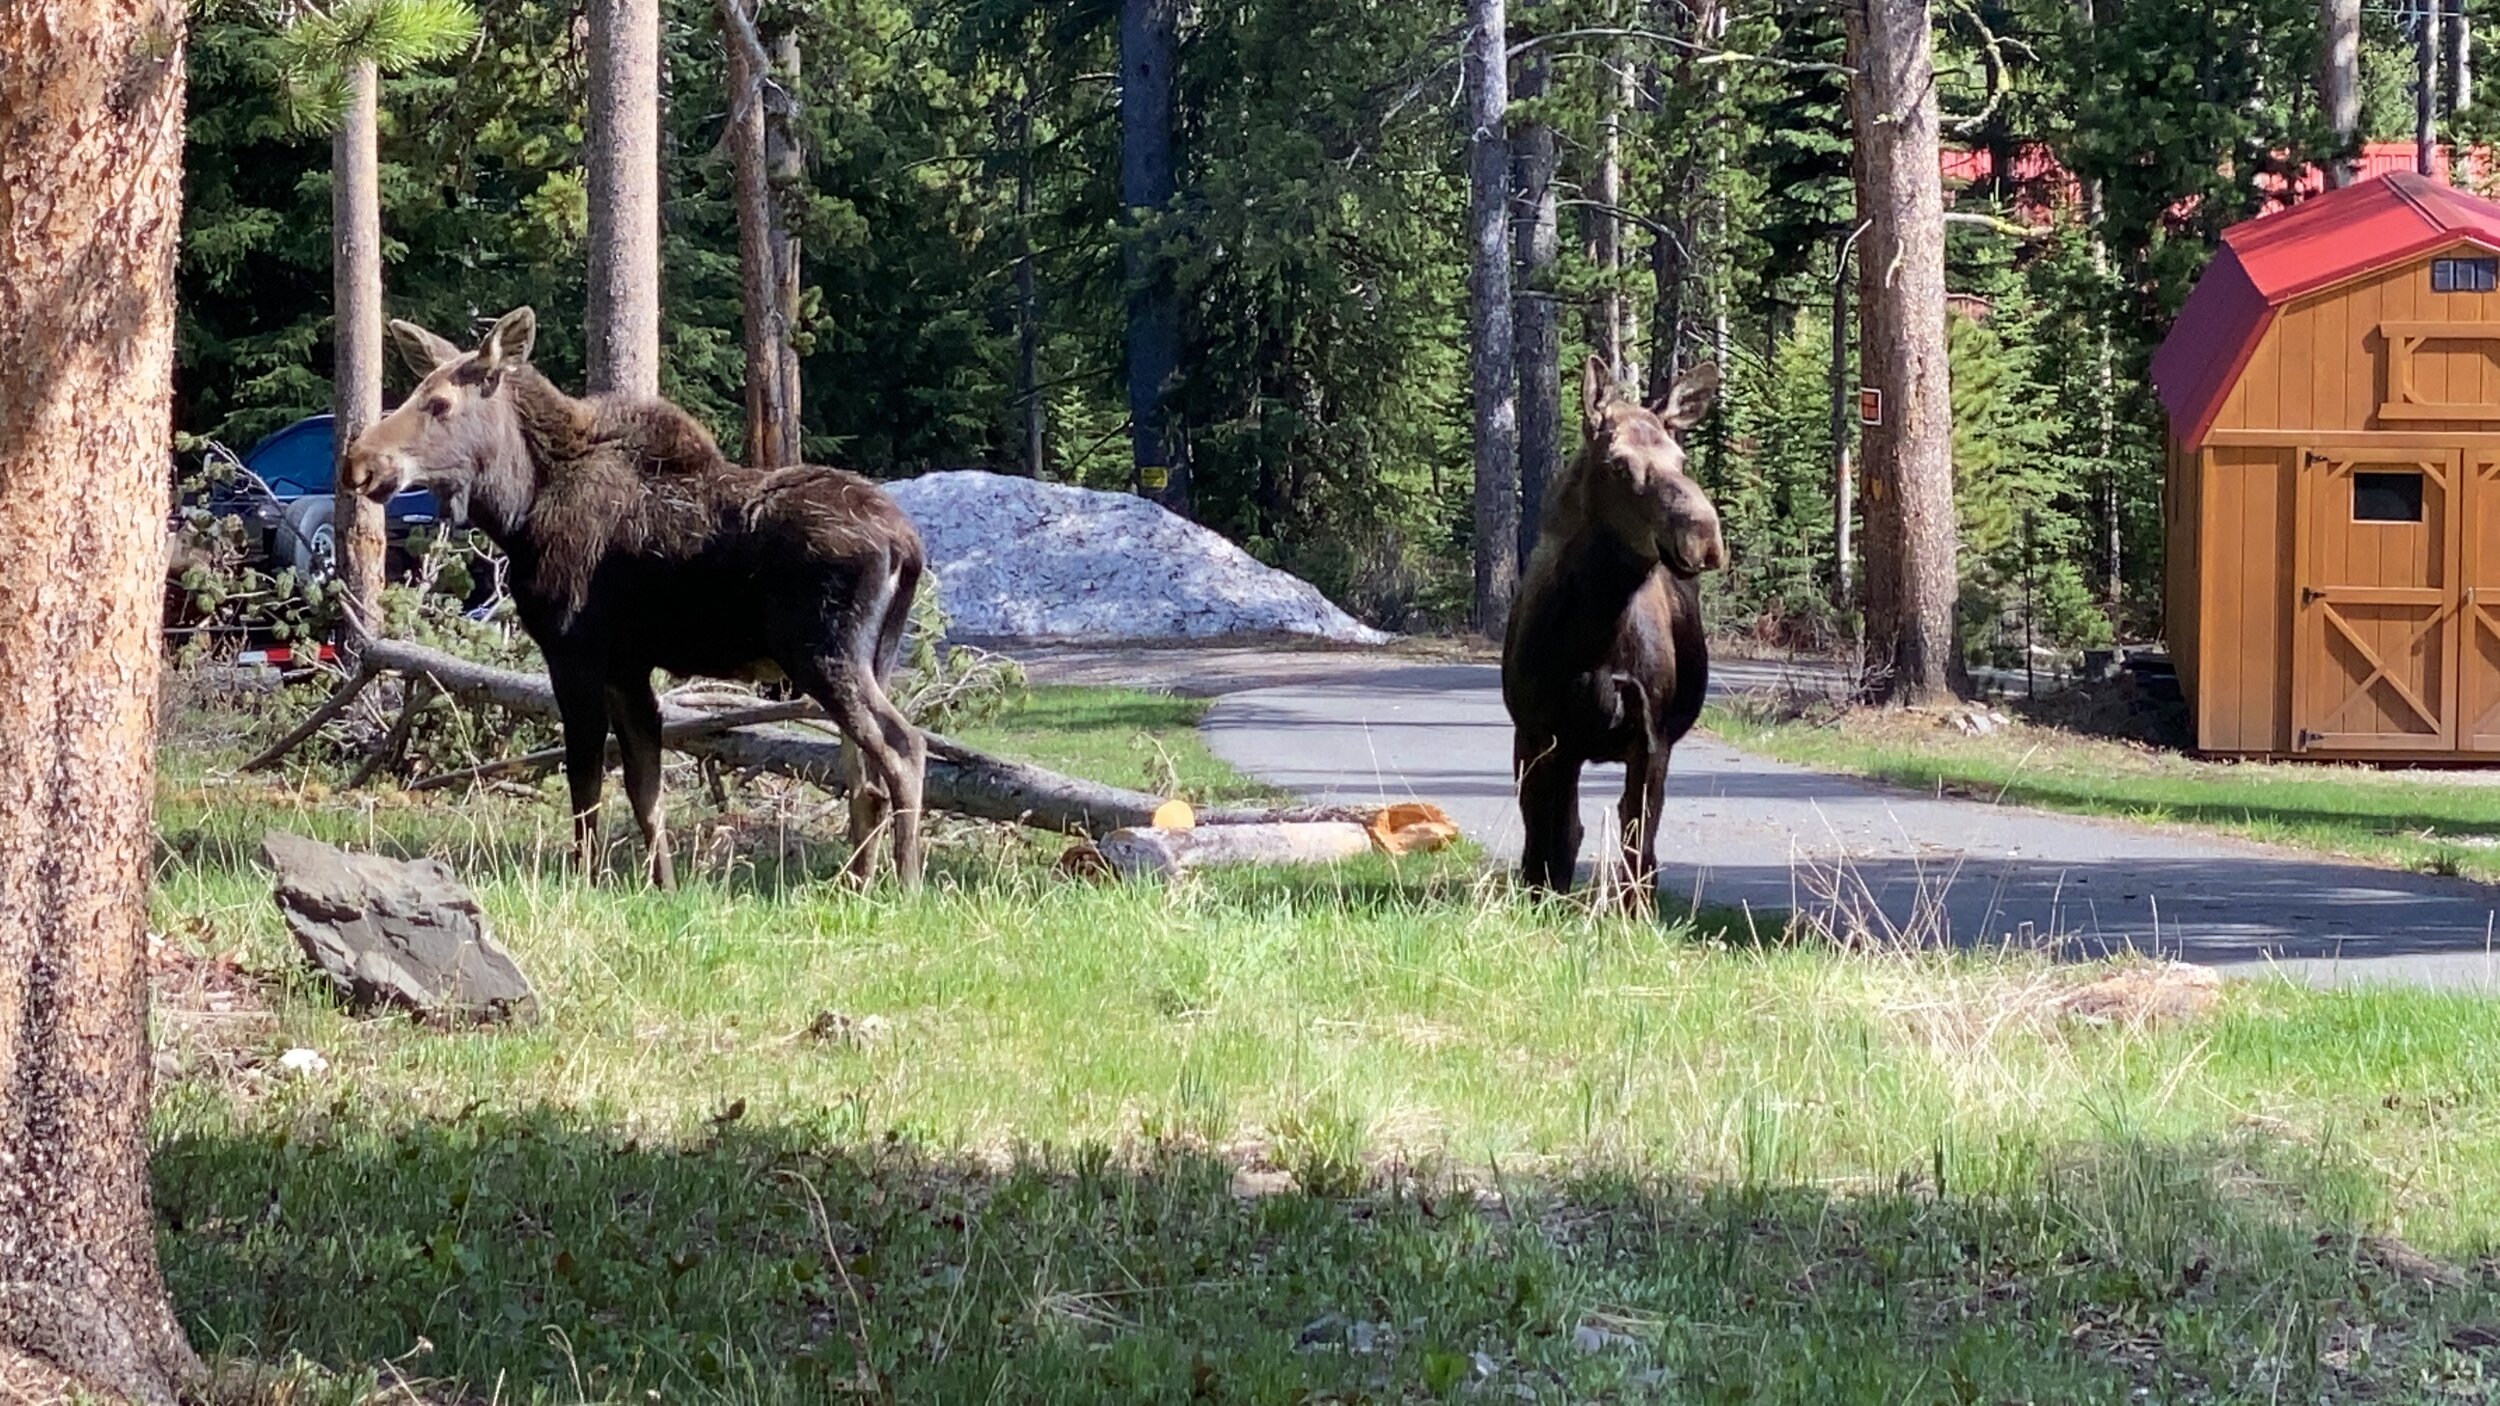 Two cow Moose behind cabins, just off the road.  Just outside of Cooke City, Custer Gallatin National Forest, Silver Gate, WY.  Photo by Karen Boudreaux, May 29, 2021